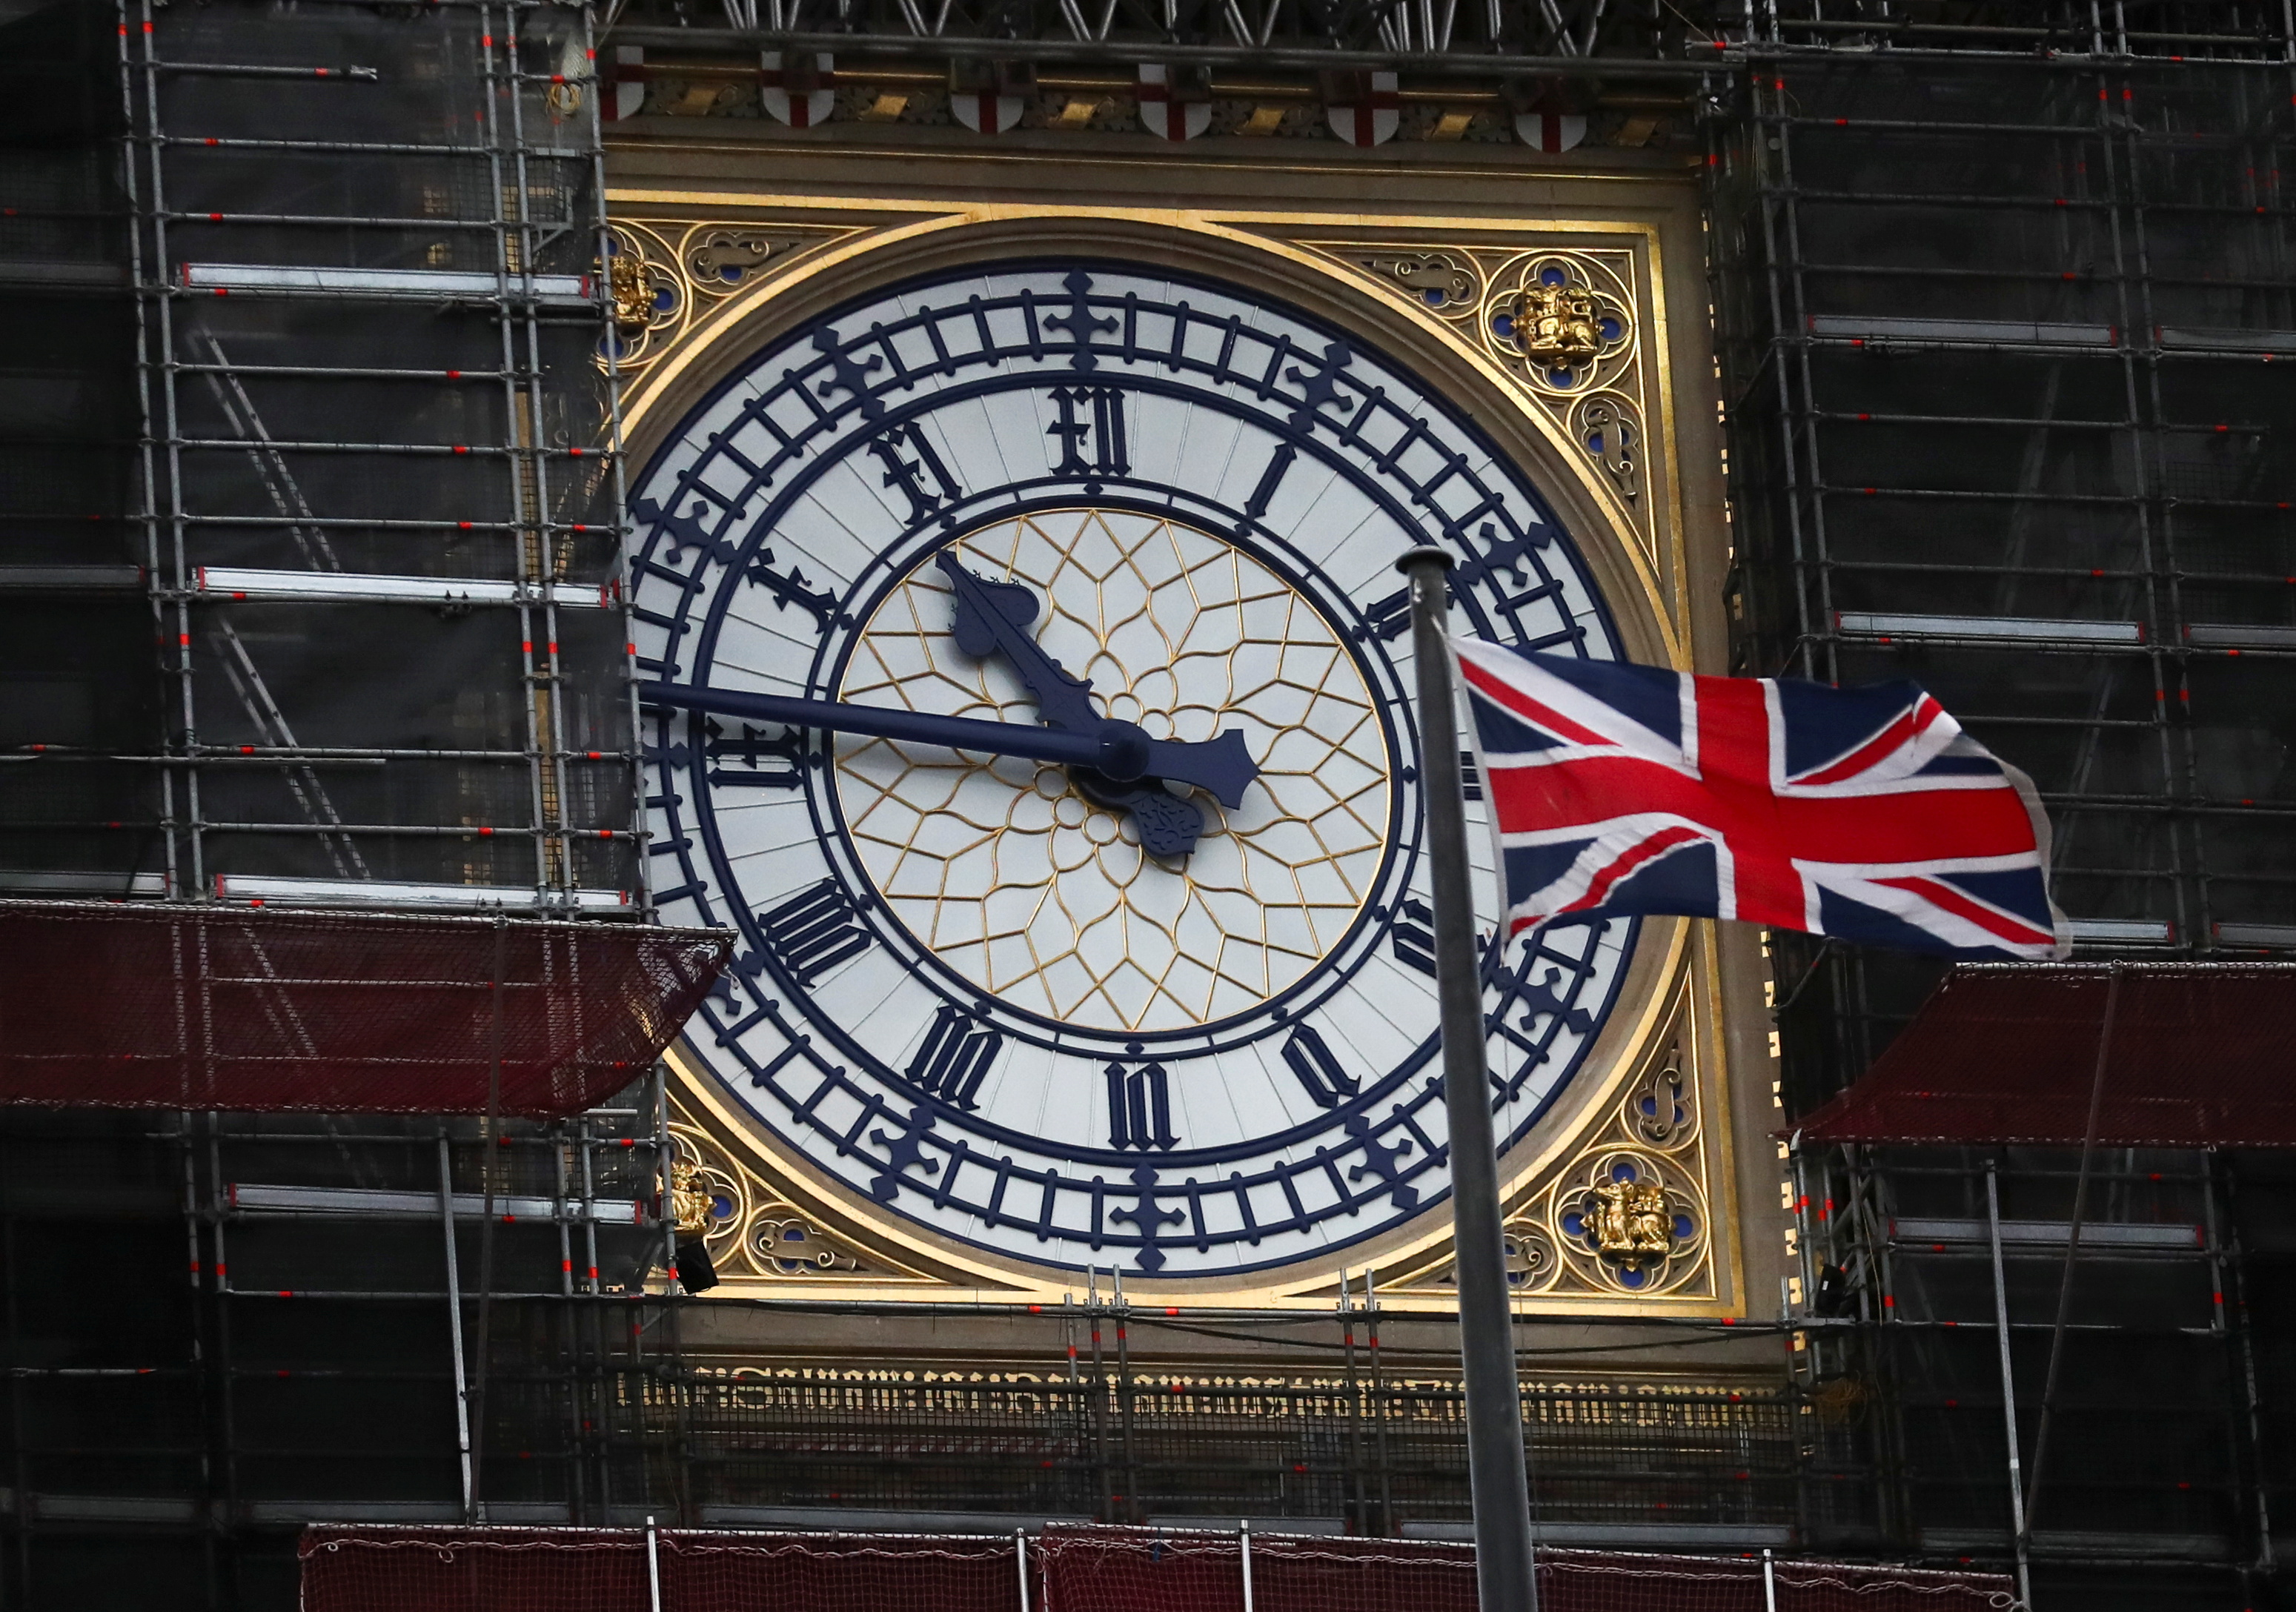 Union Jack flag flutters in front of Big Ben's clock face in London